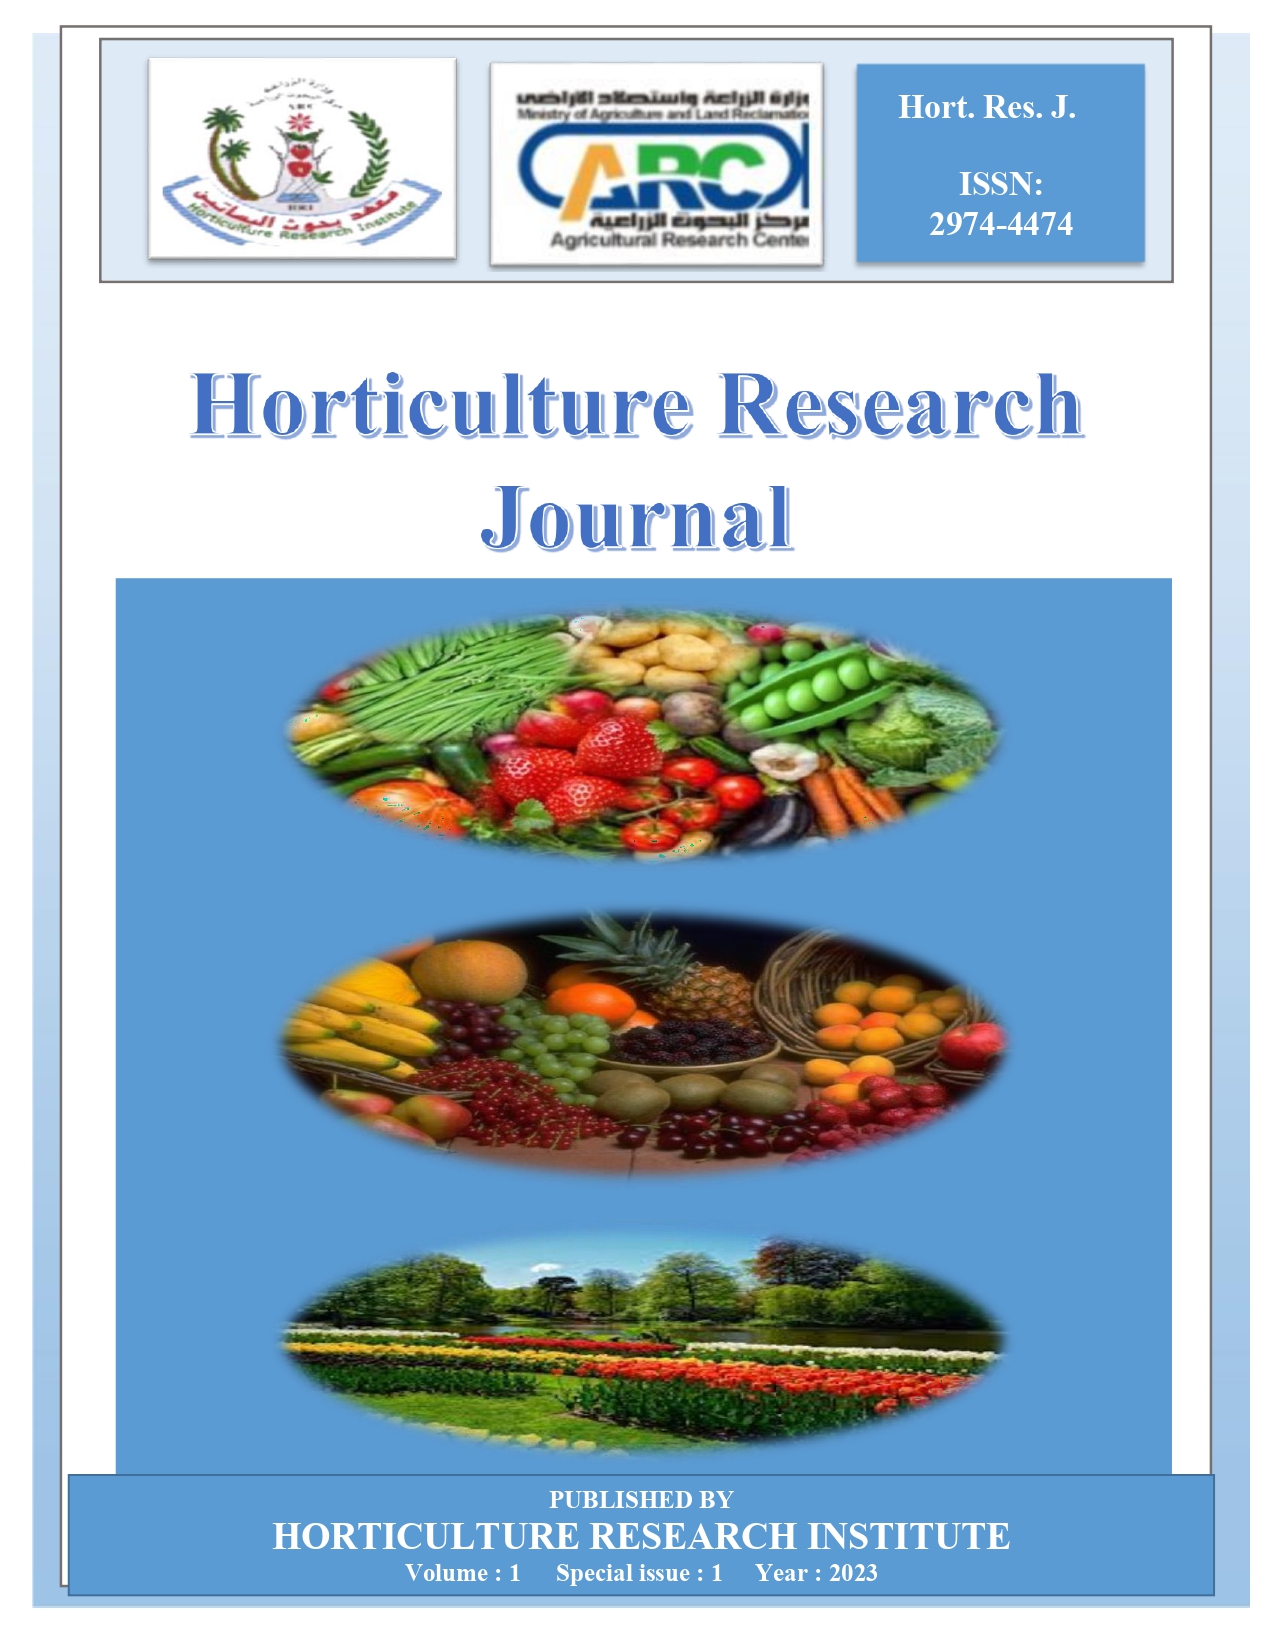 topics for research paper in horticulture